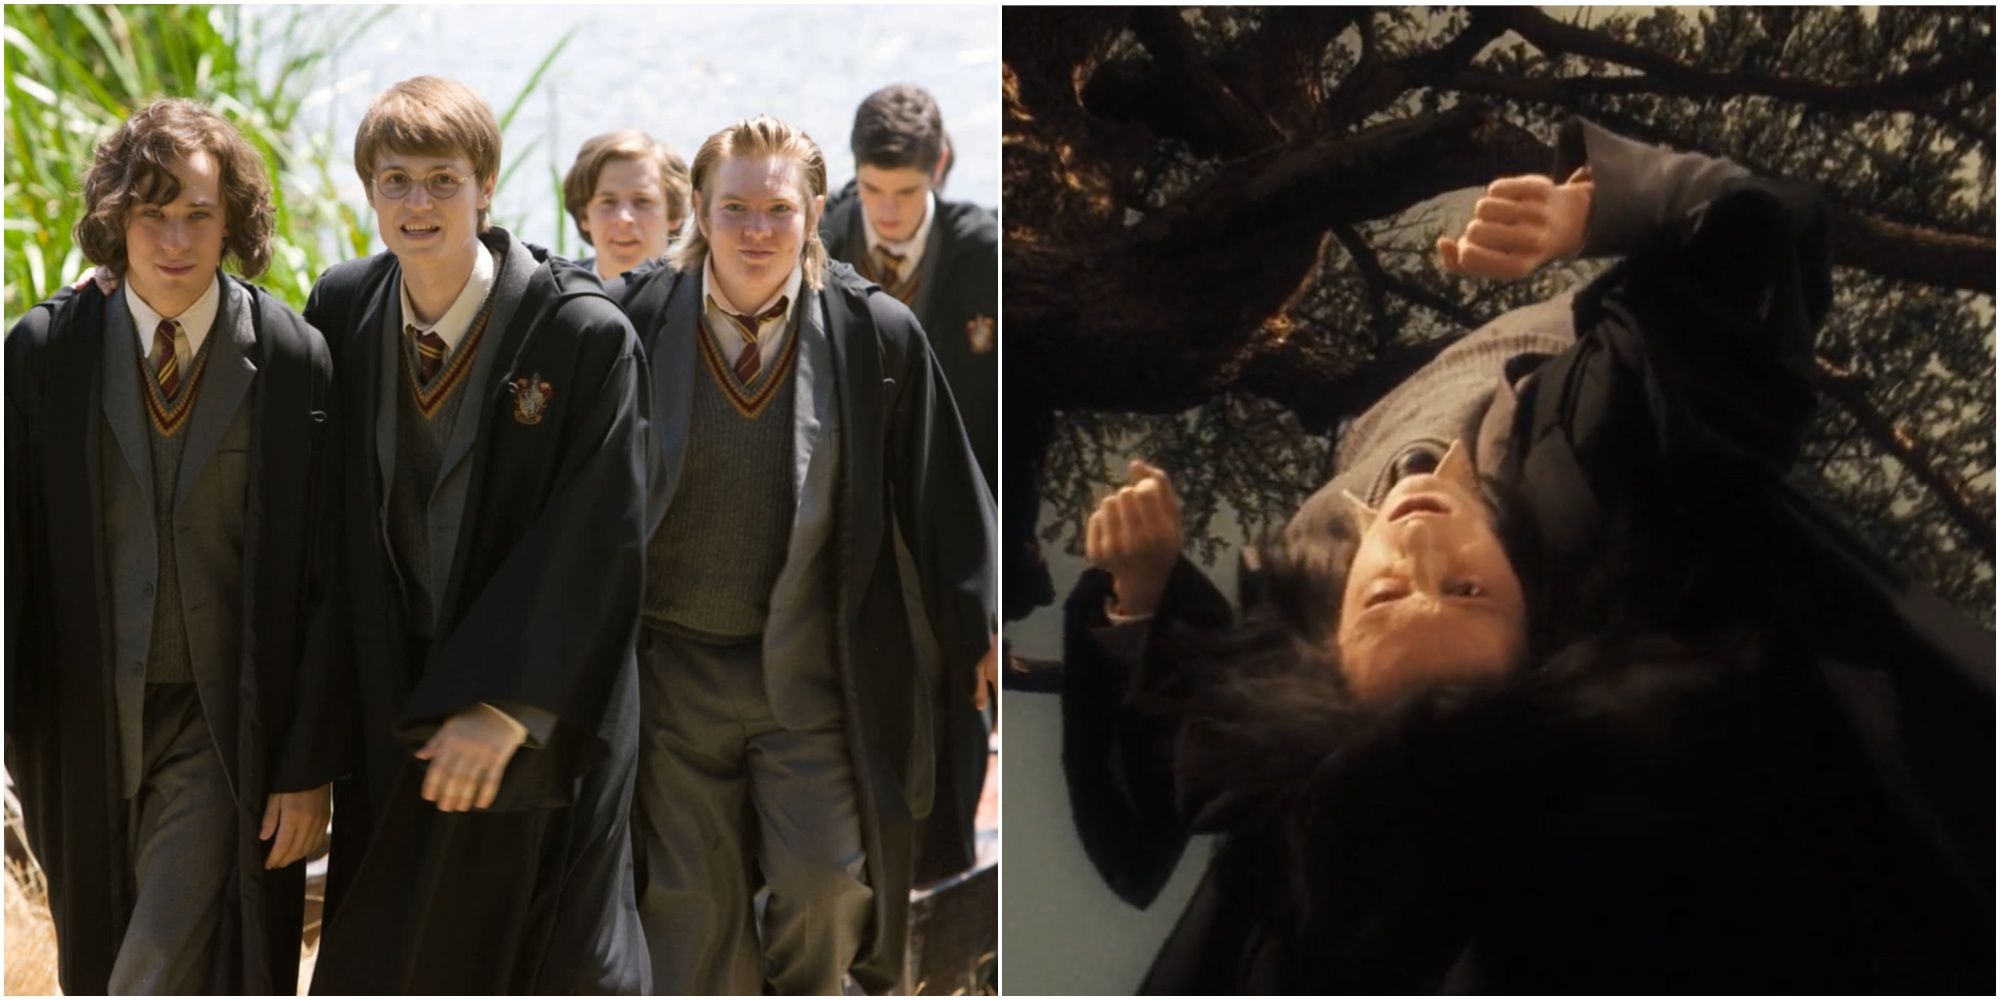 A split image of the Marauders and Snape hung upside down in Harry Potter.